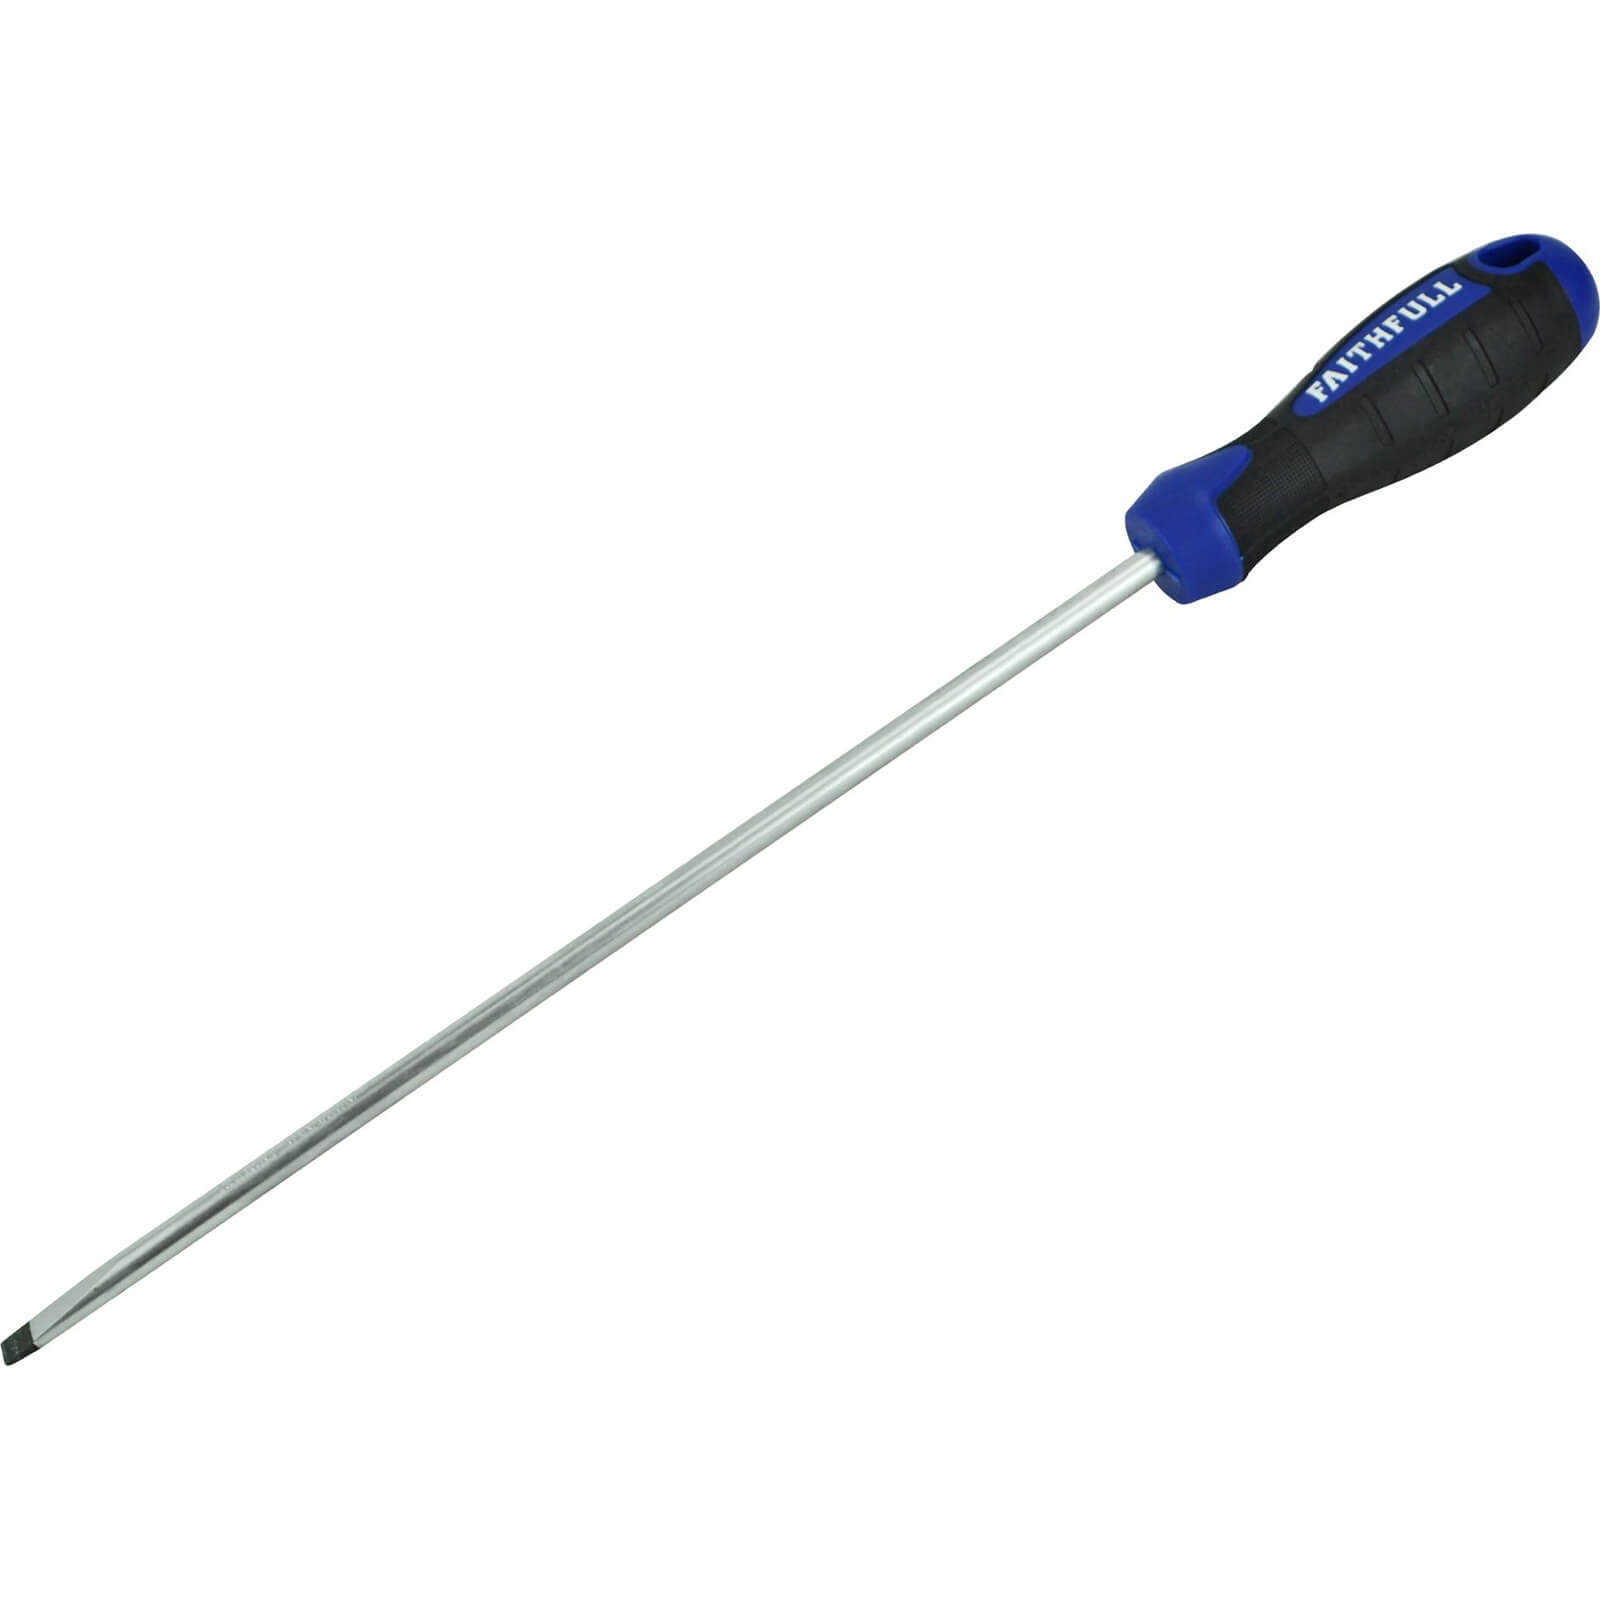 Photo of Faithfull Soft Grip Flared Slotted Tip Screwdriver 10mm 250mm